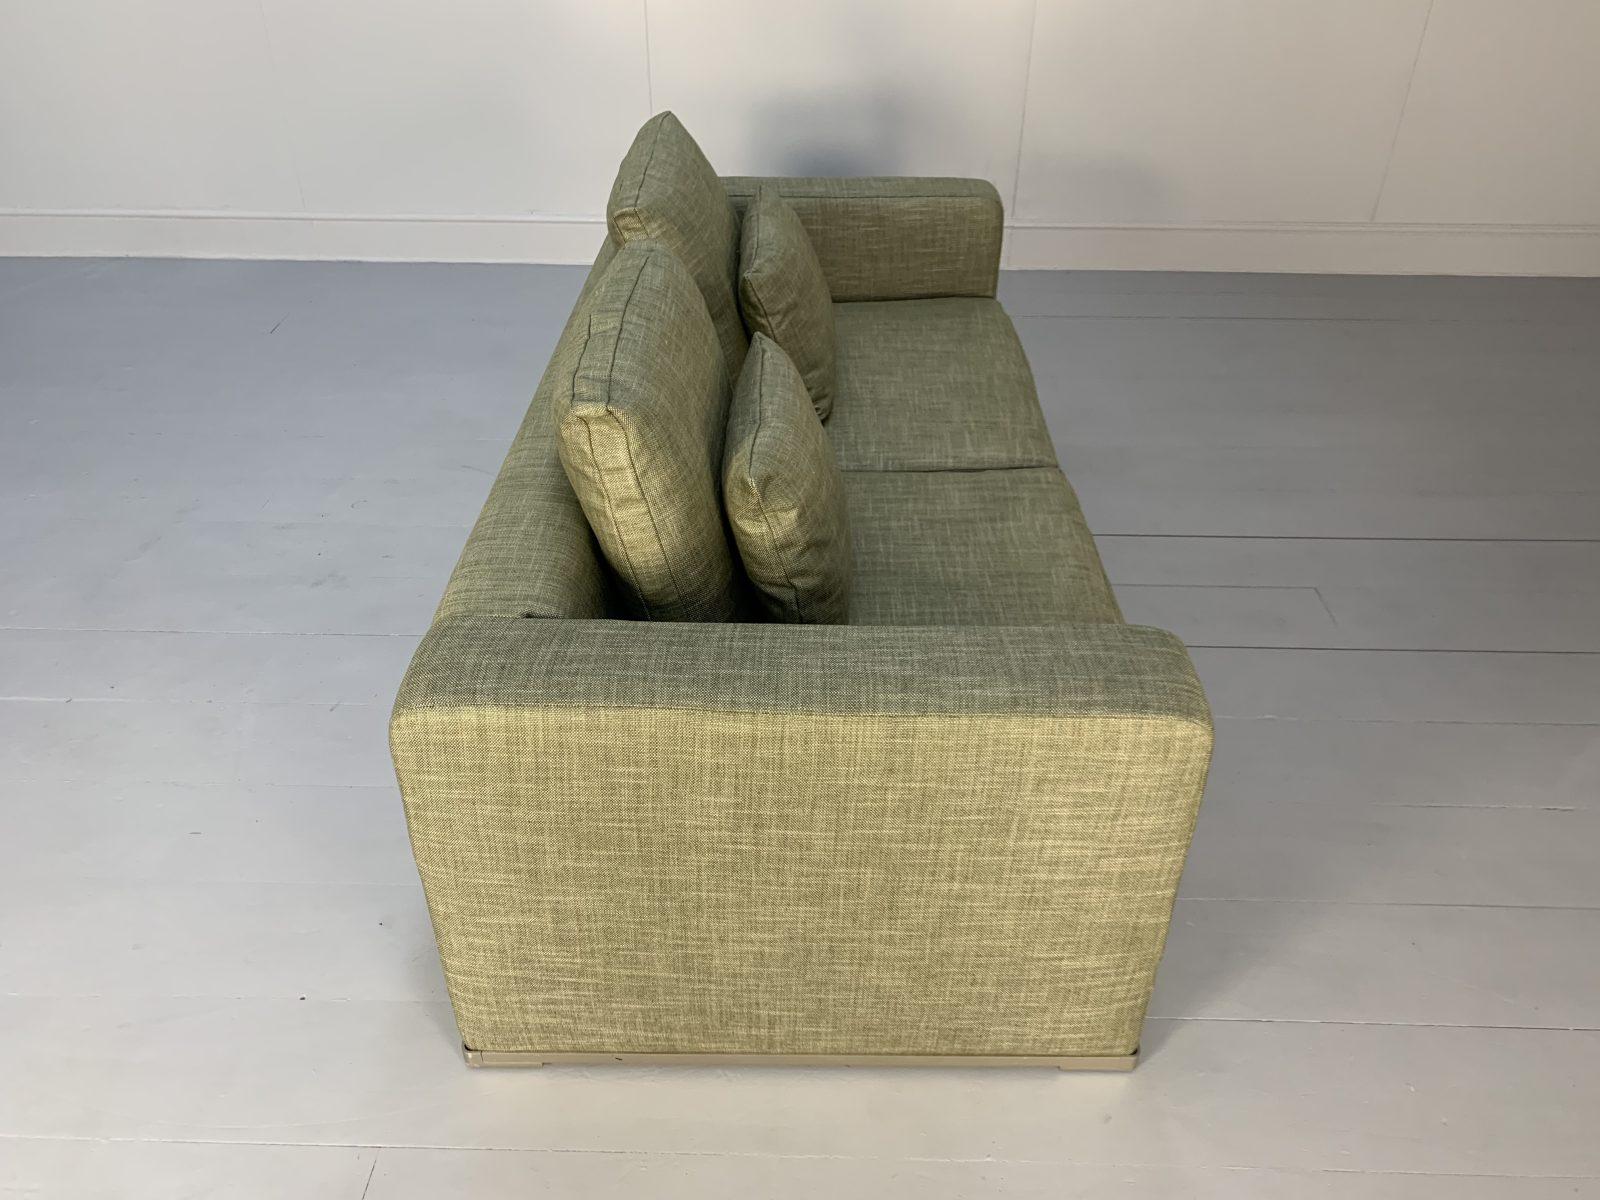 Pair of B&B Italia “Omnia” Sofas, 2.5-Seat, in Pale Green Linen For Sale 7